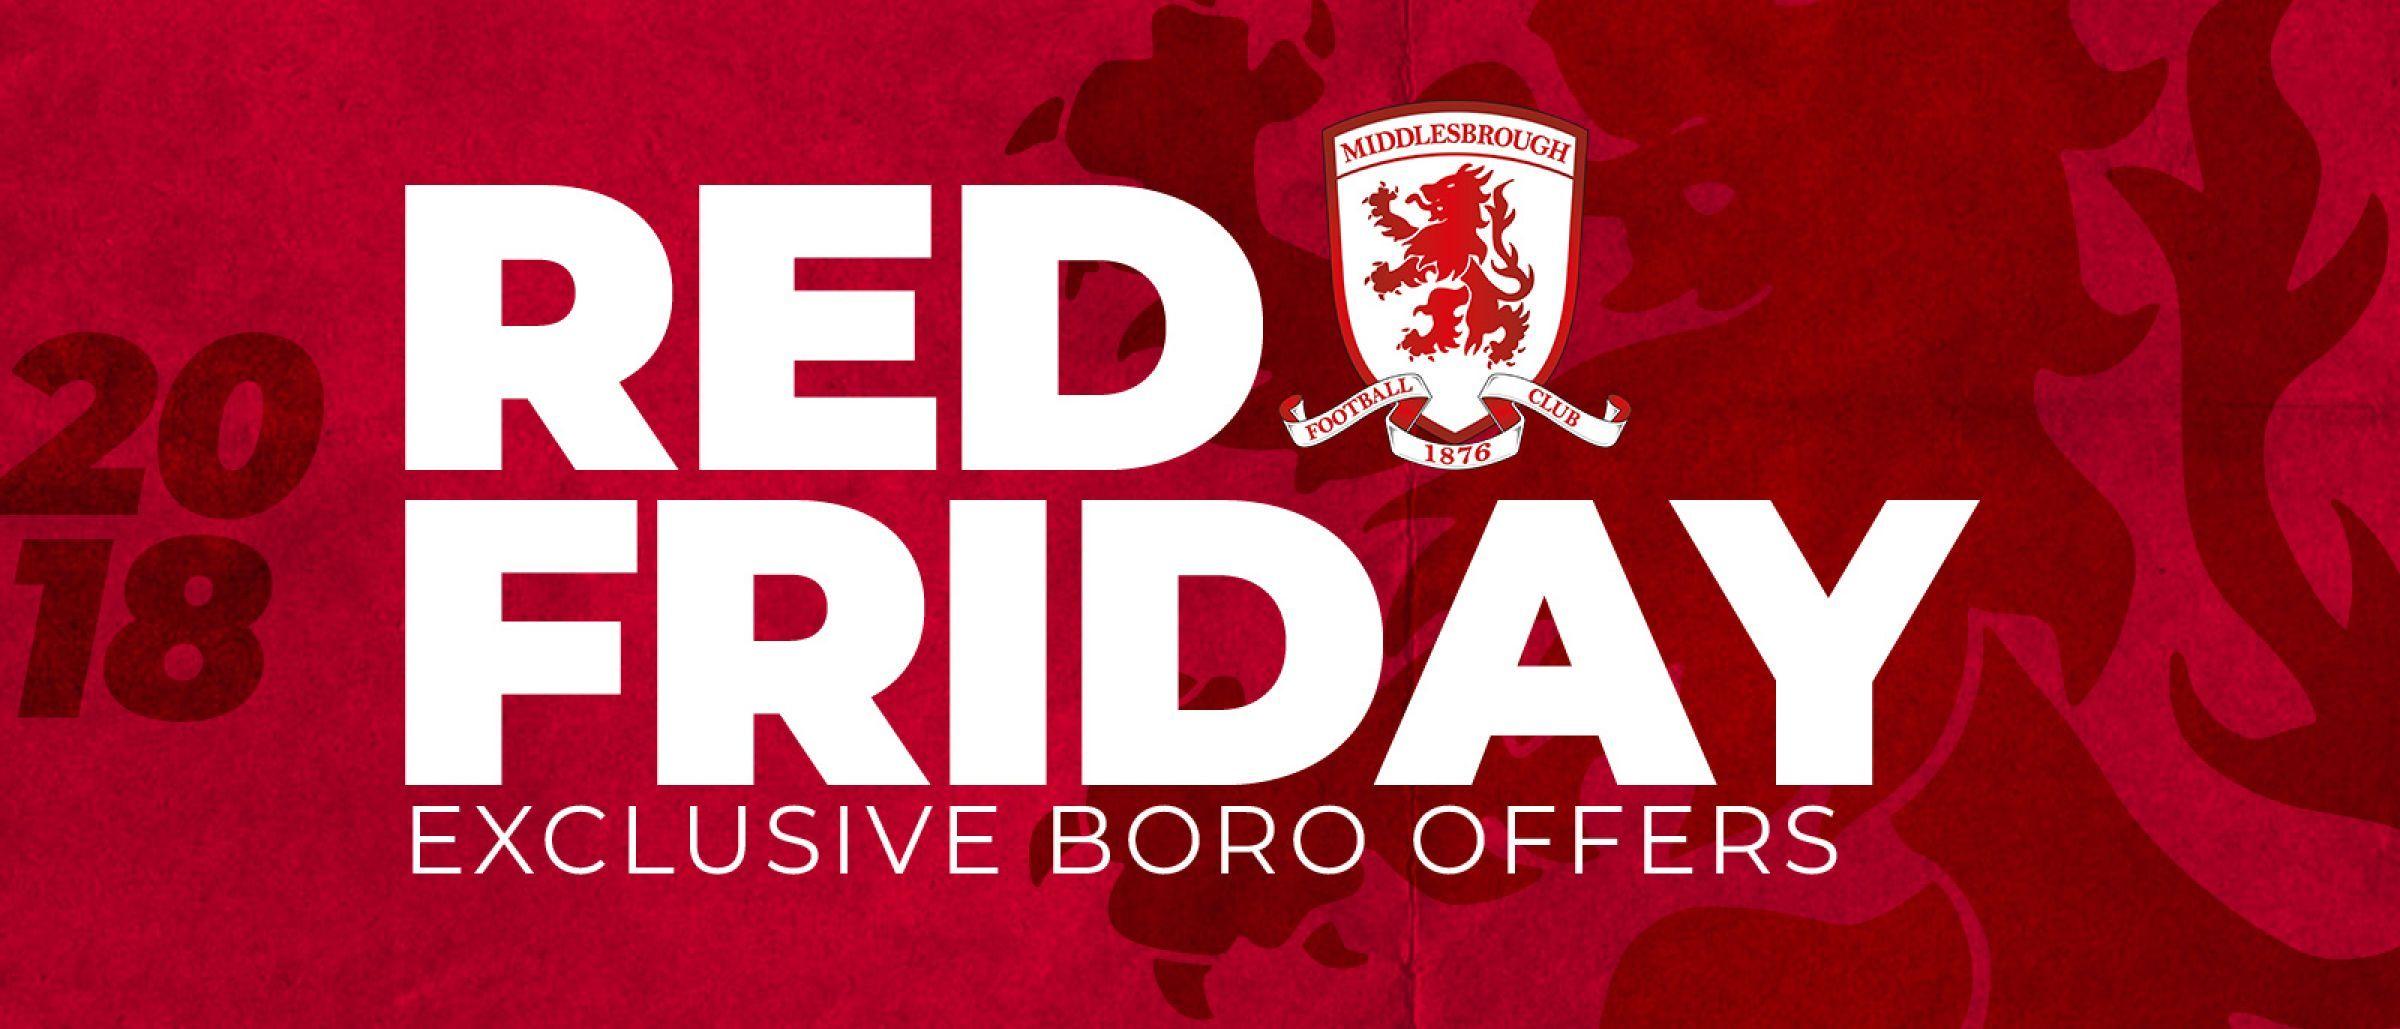 Red Friday Logo - Red Friday Offers From MFC | Middlesbrough FC